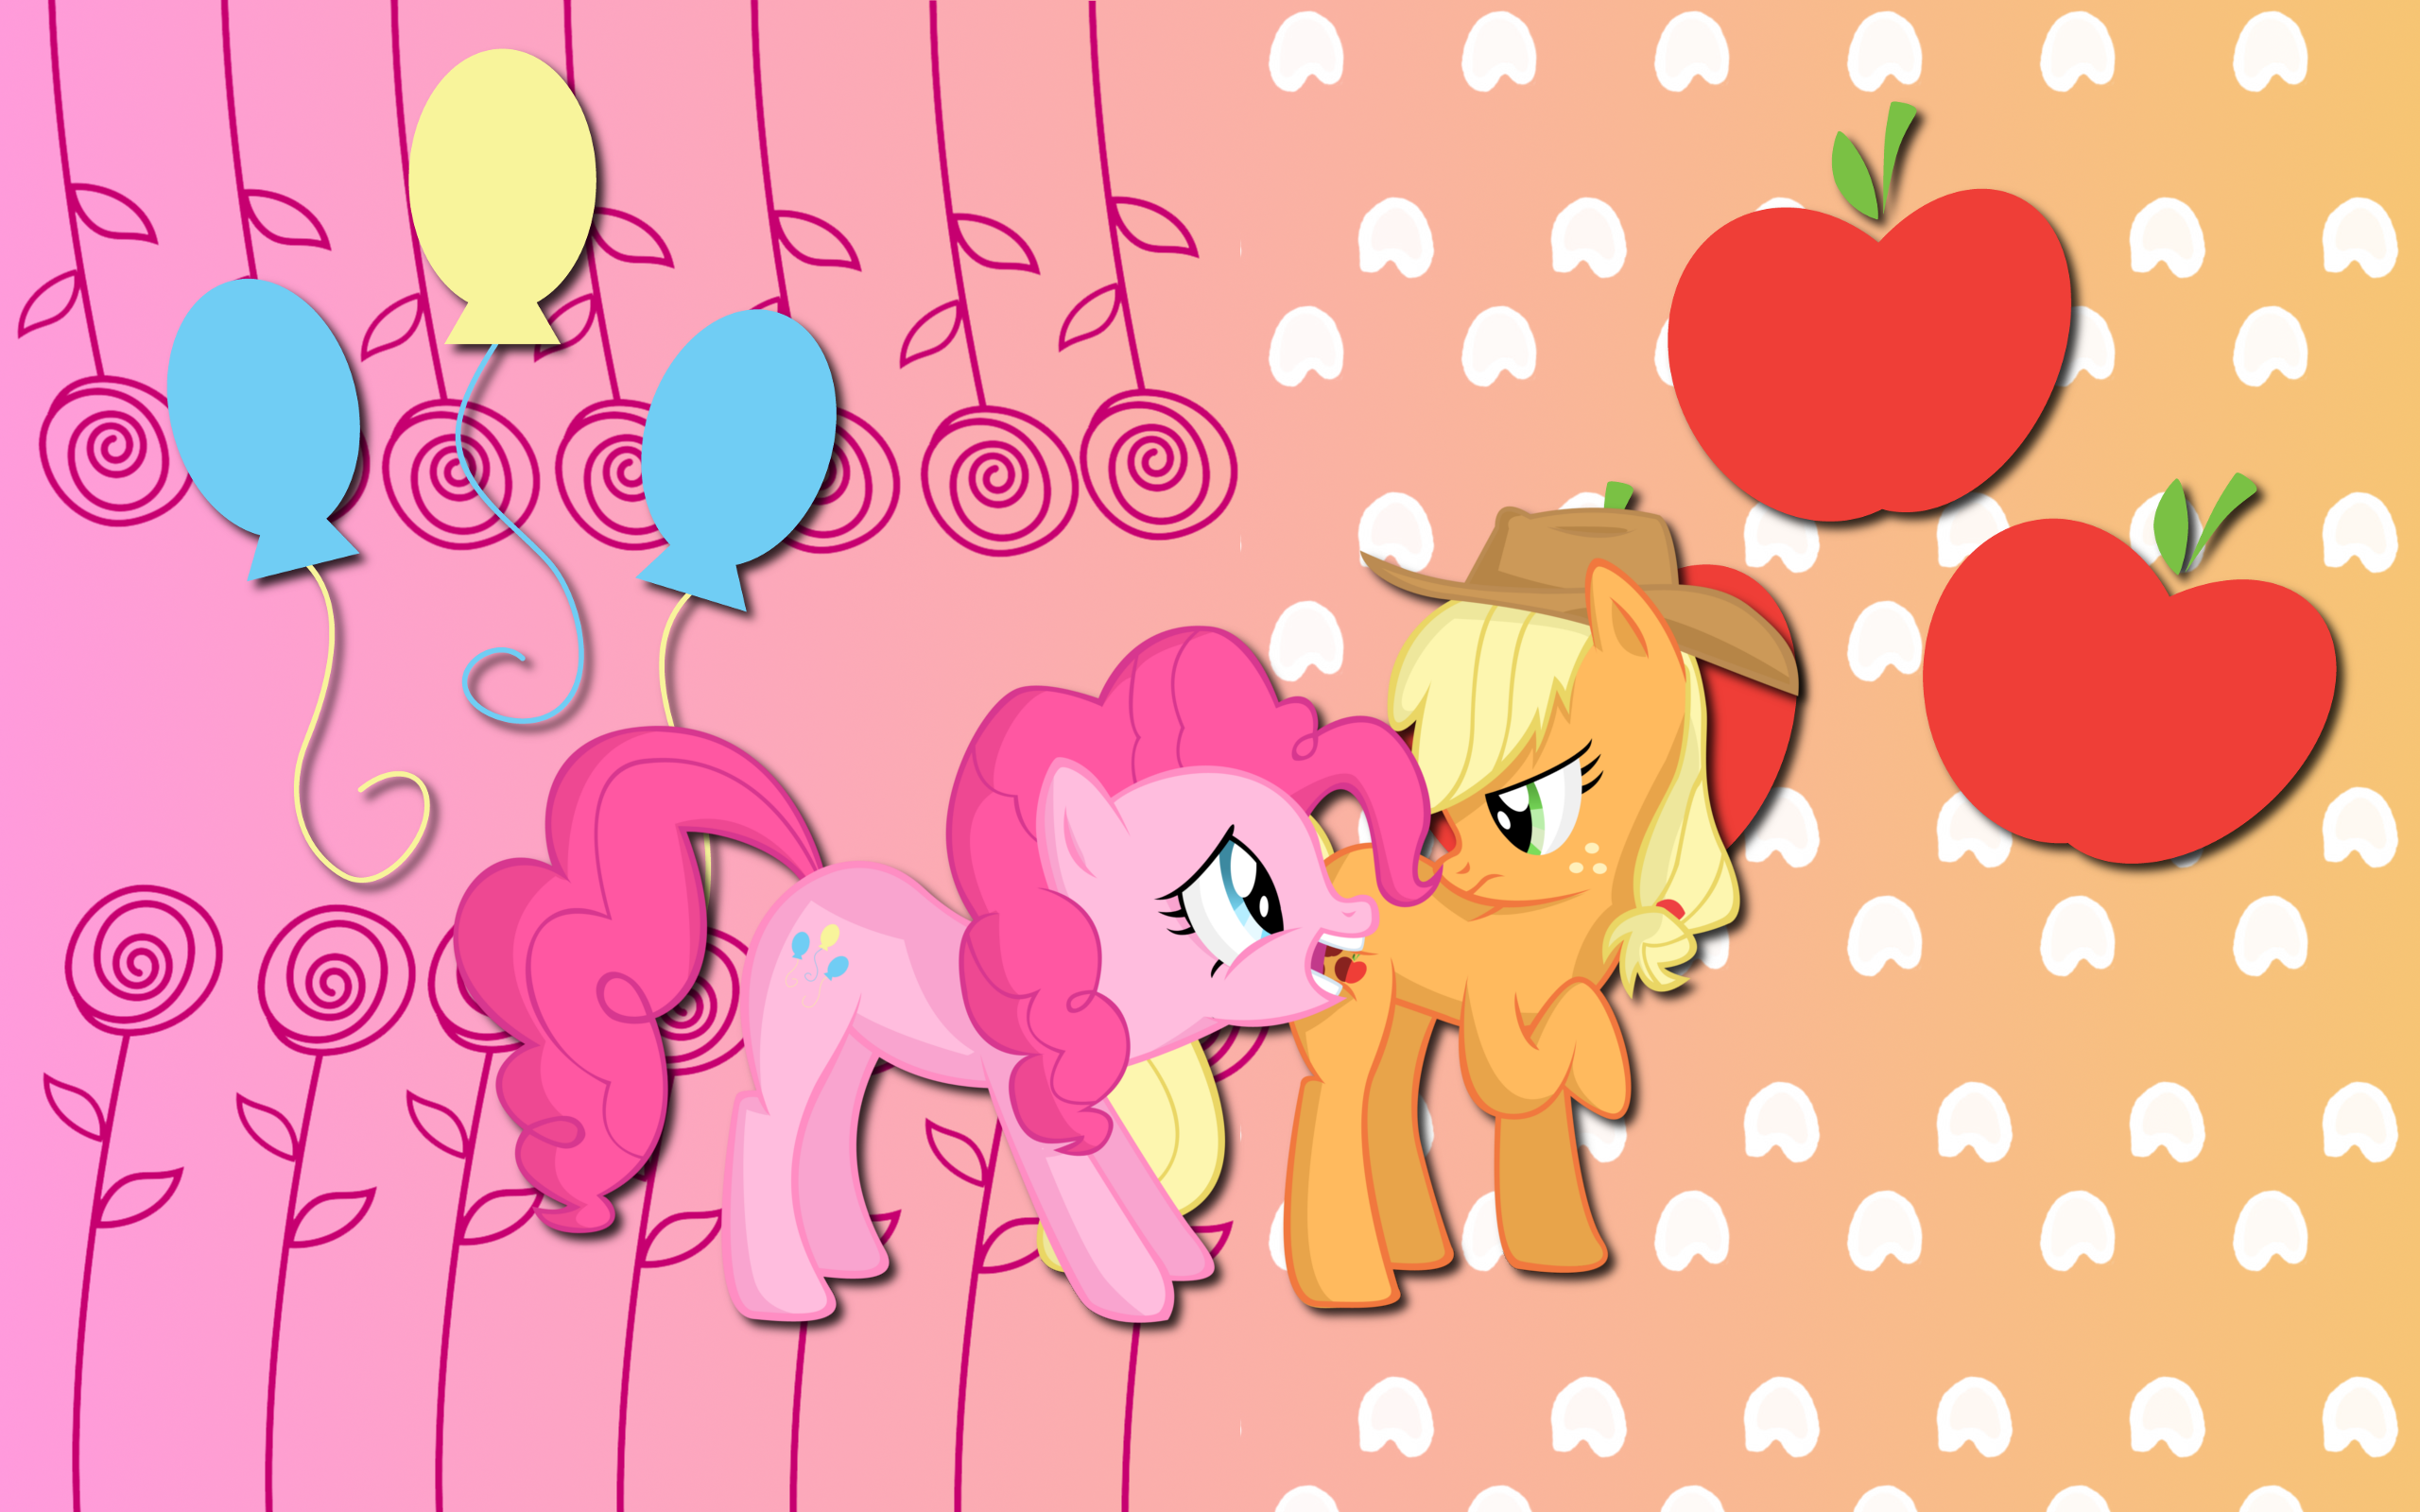 Apple Pie wallpaper by AliceHumanSacrifice0, Blackm3sh and ooklah